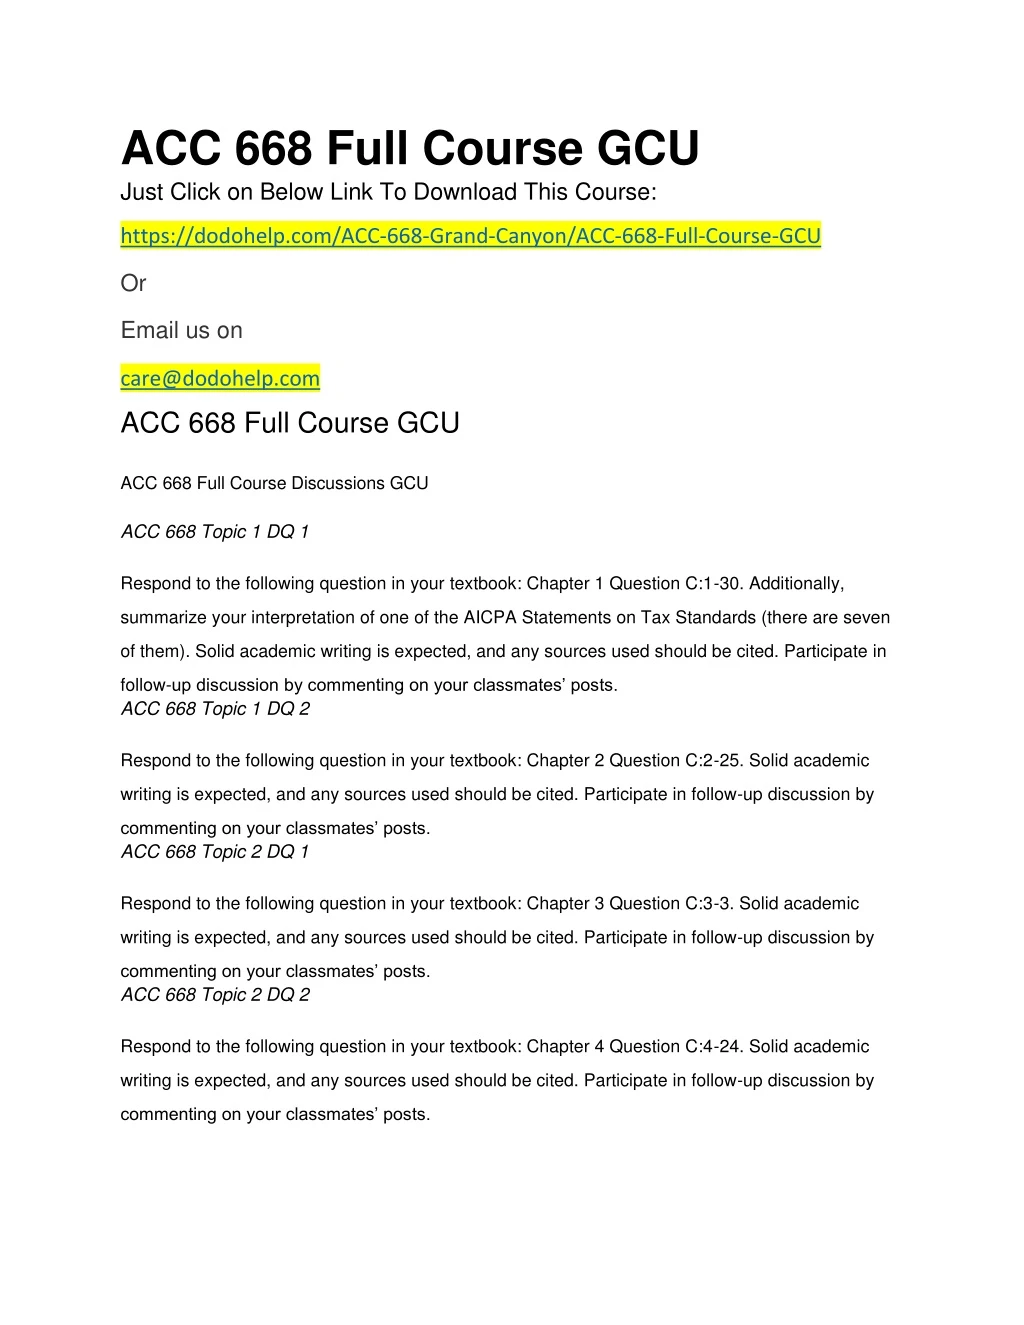 acc 668 full course gcu just click on below link